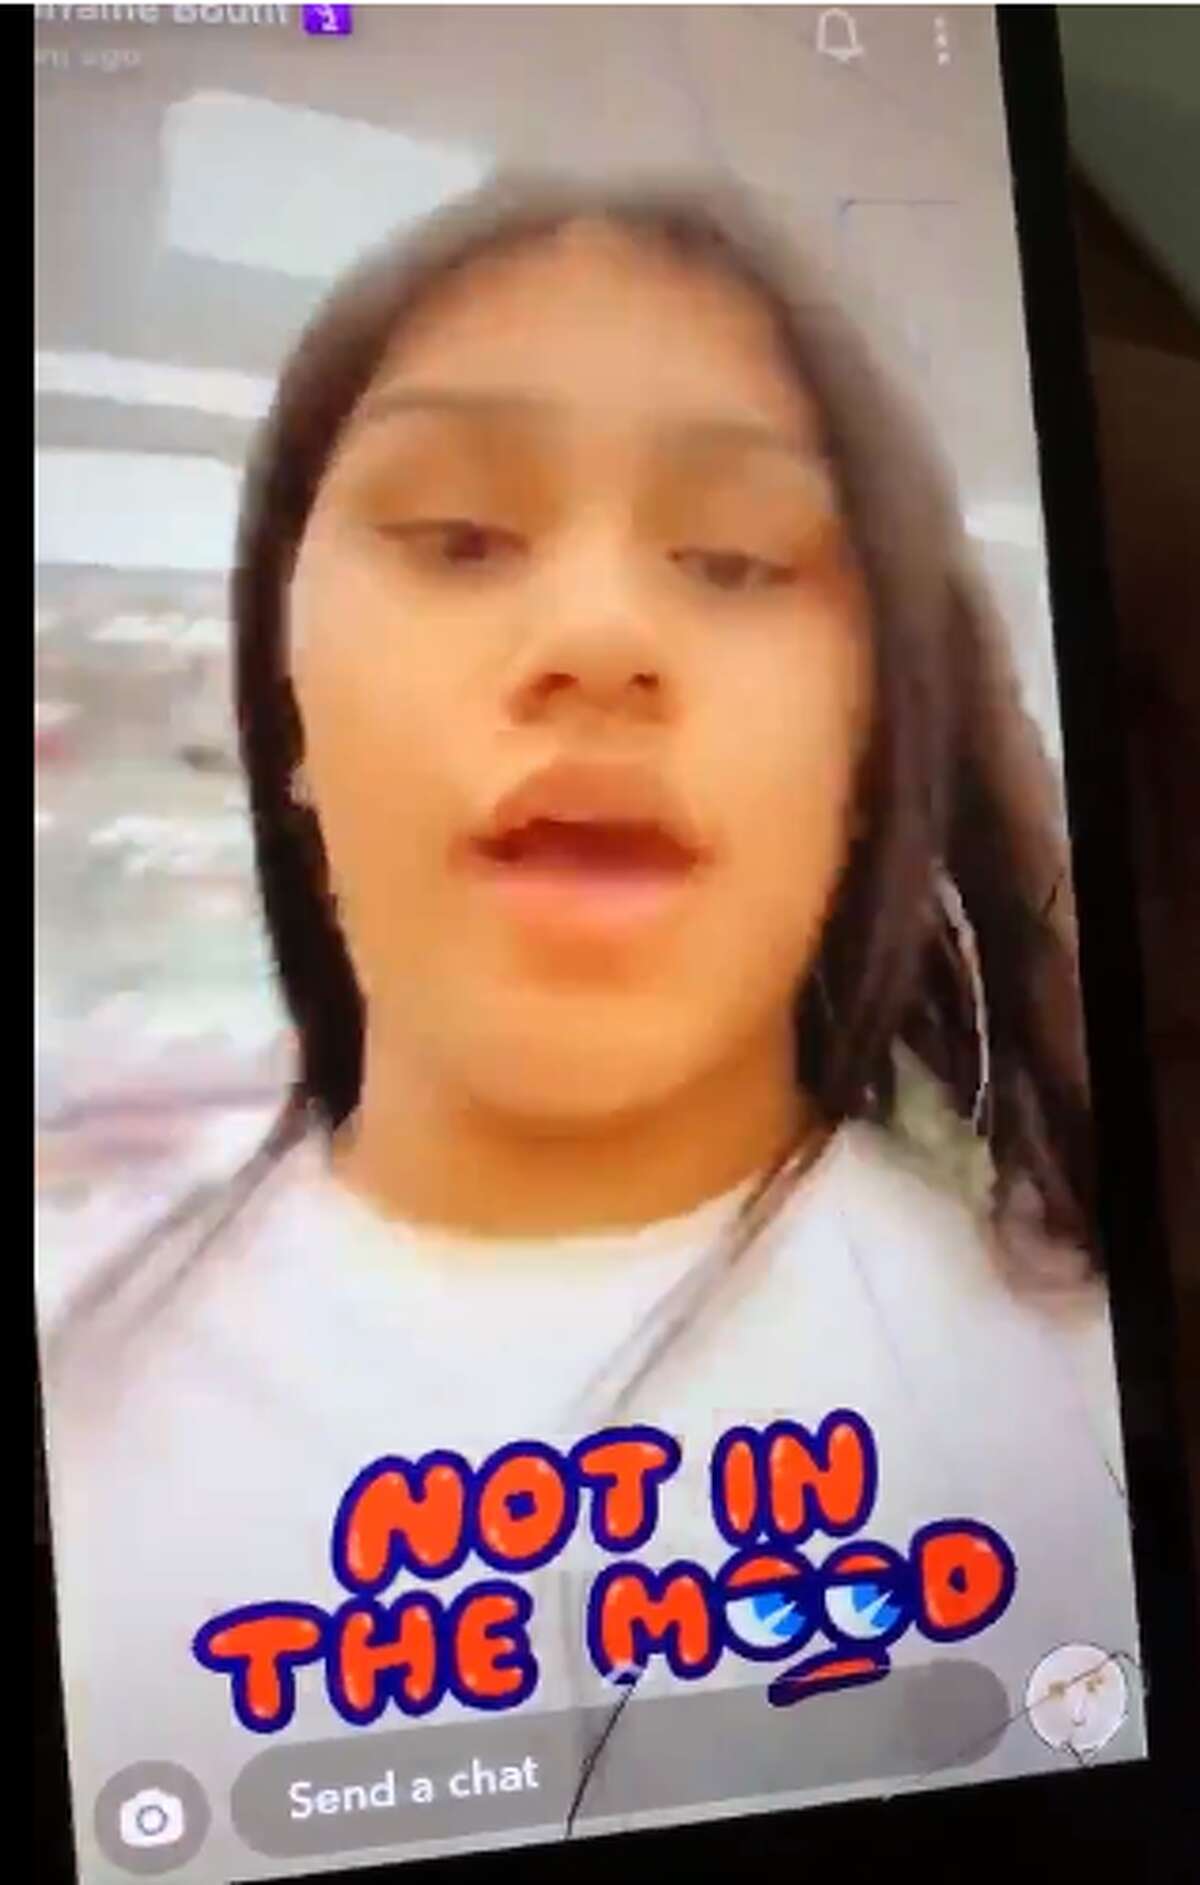 The Carrollton Police Department said Lorraine Maradiaga, 18, was "seen on social media claiming to be COVID-19 positive and willfully spreading it."